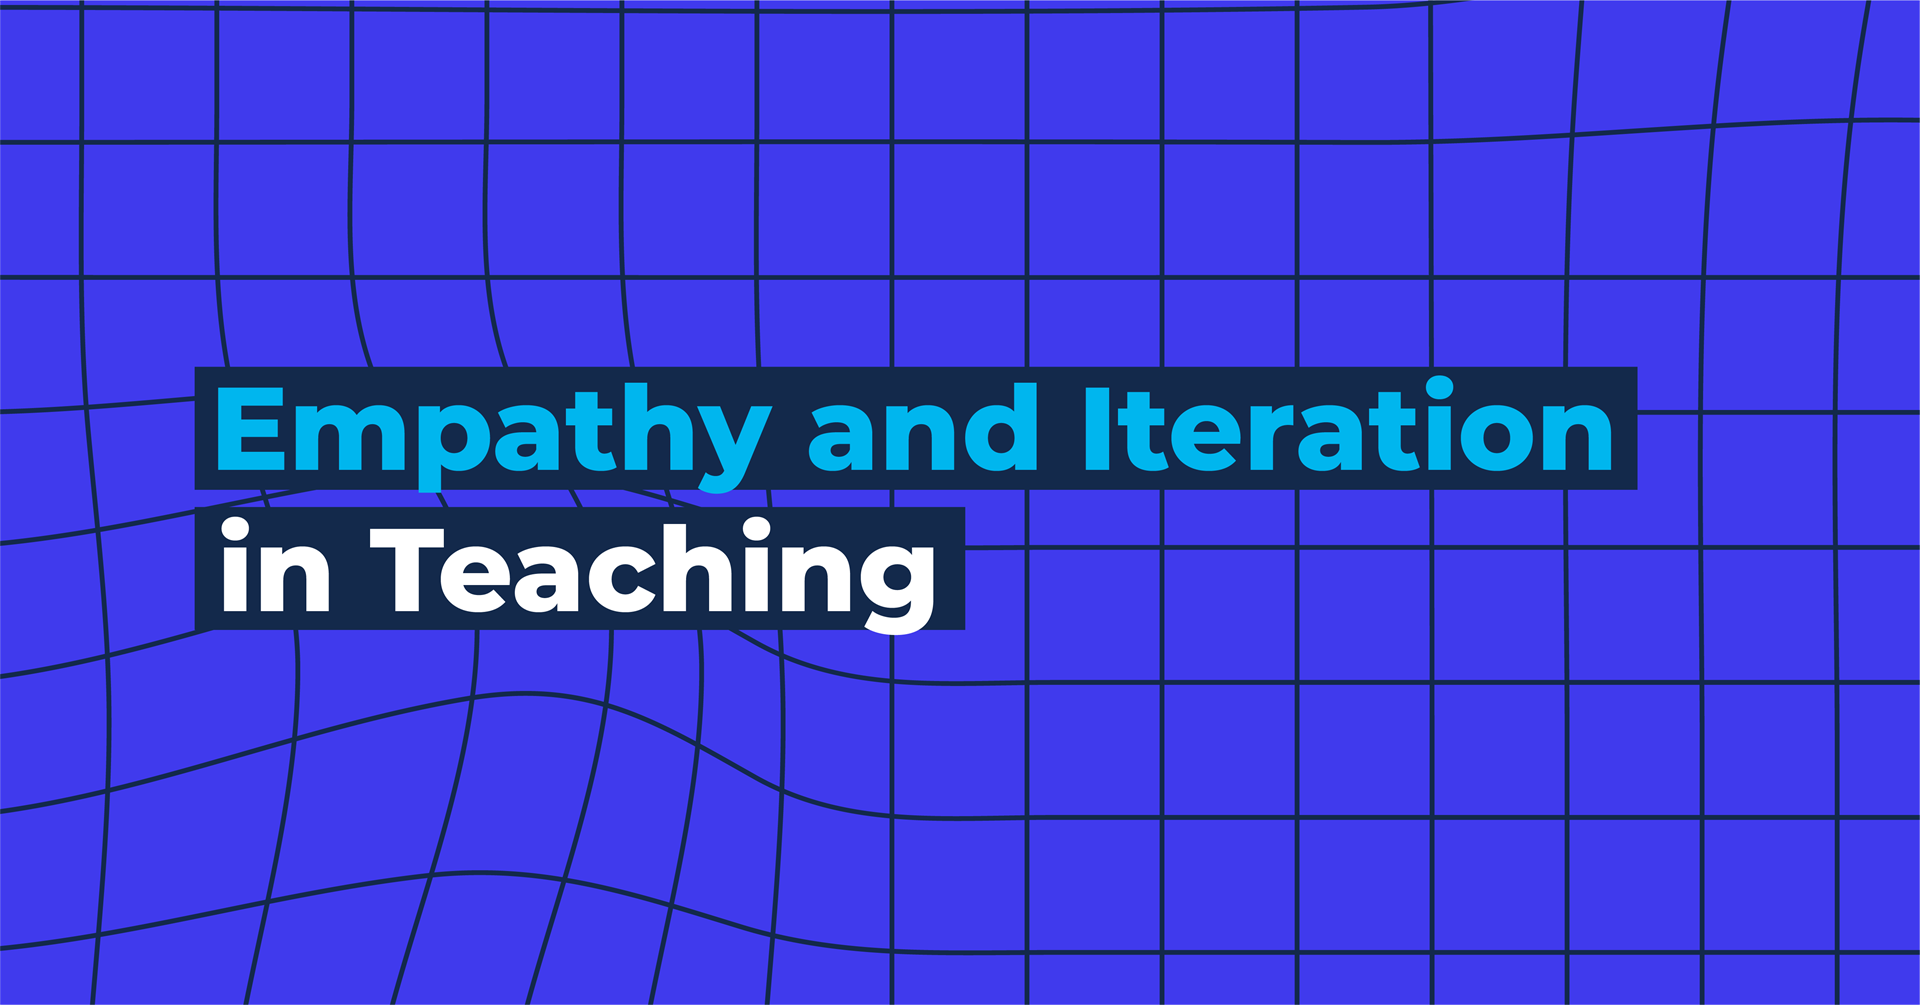 Empathy and Iteration in Teaching